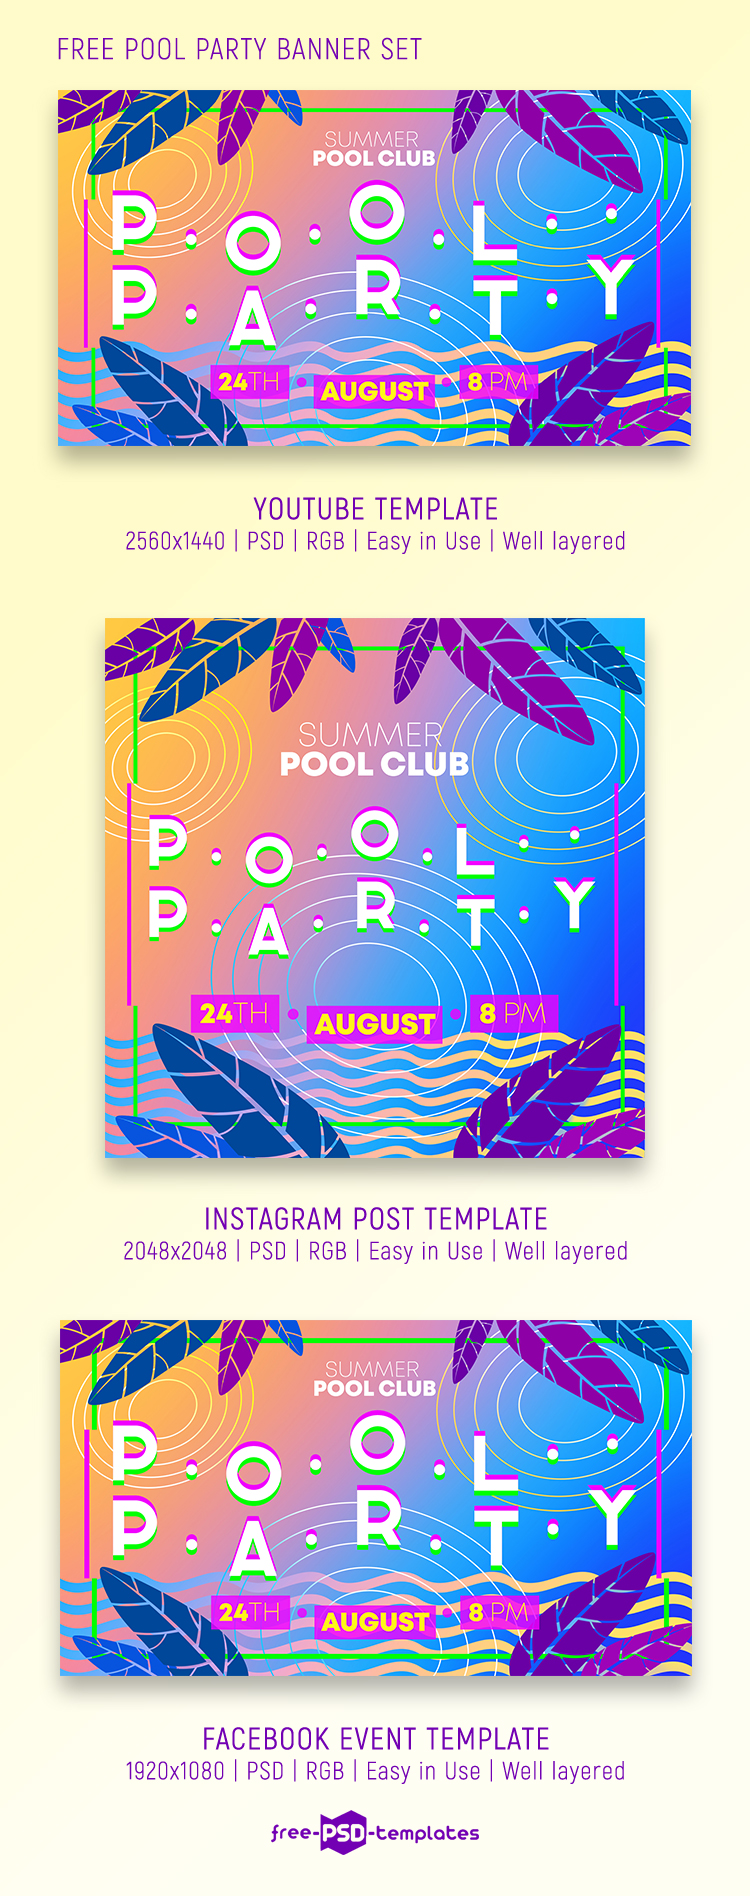 free-pool-party-banner-set-free-psd-templates